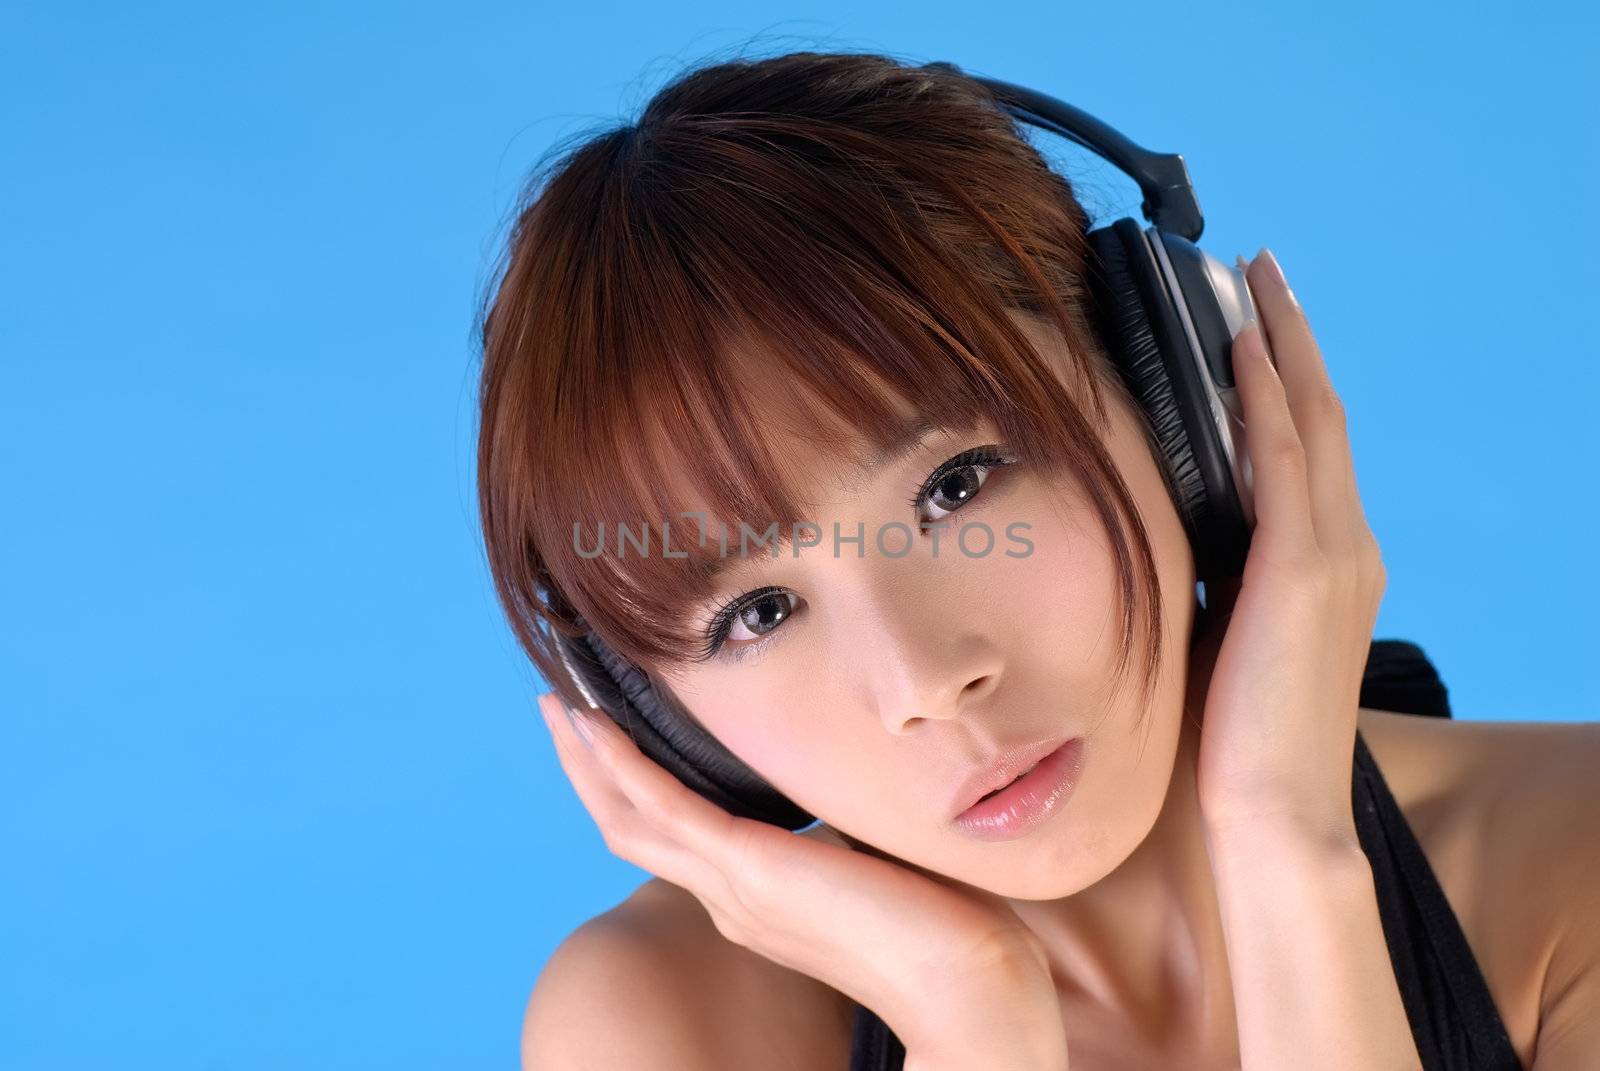 Asian beauty with headphone, closeup portrait on blue background.